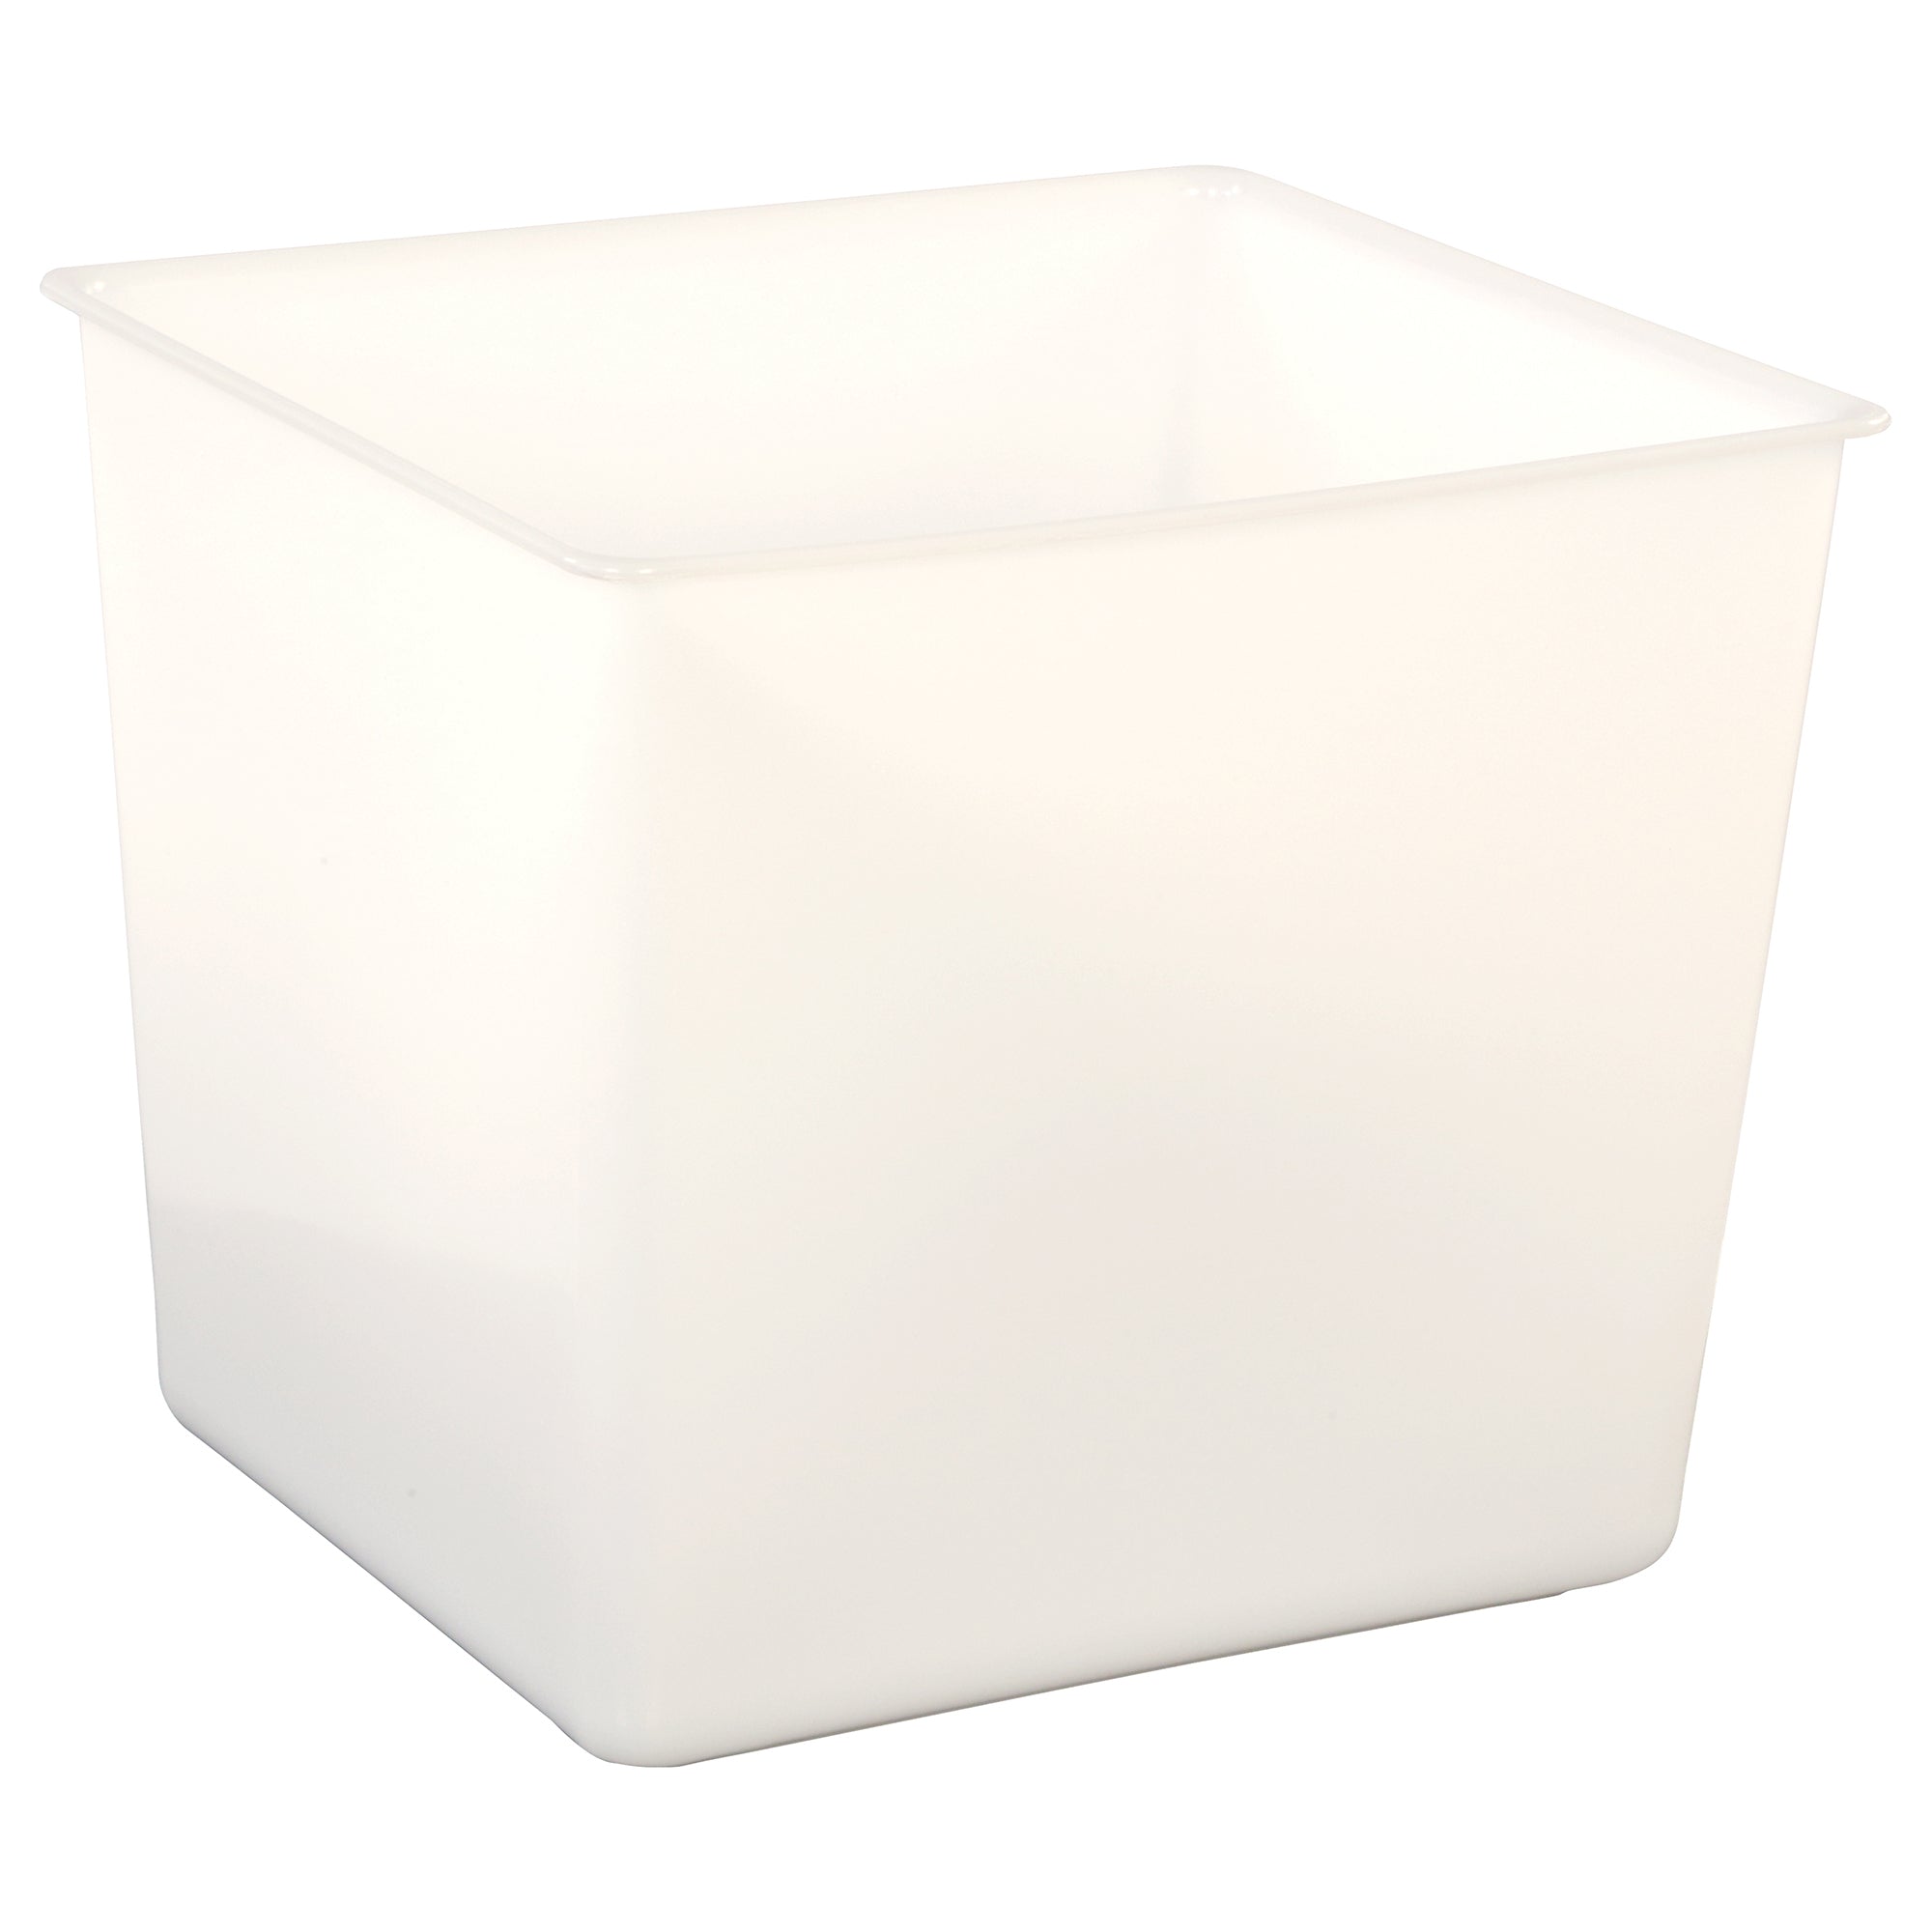 Tot Mate Large Opaque Bins - Pack of 5 (Opaque White)